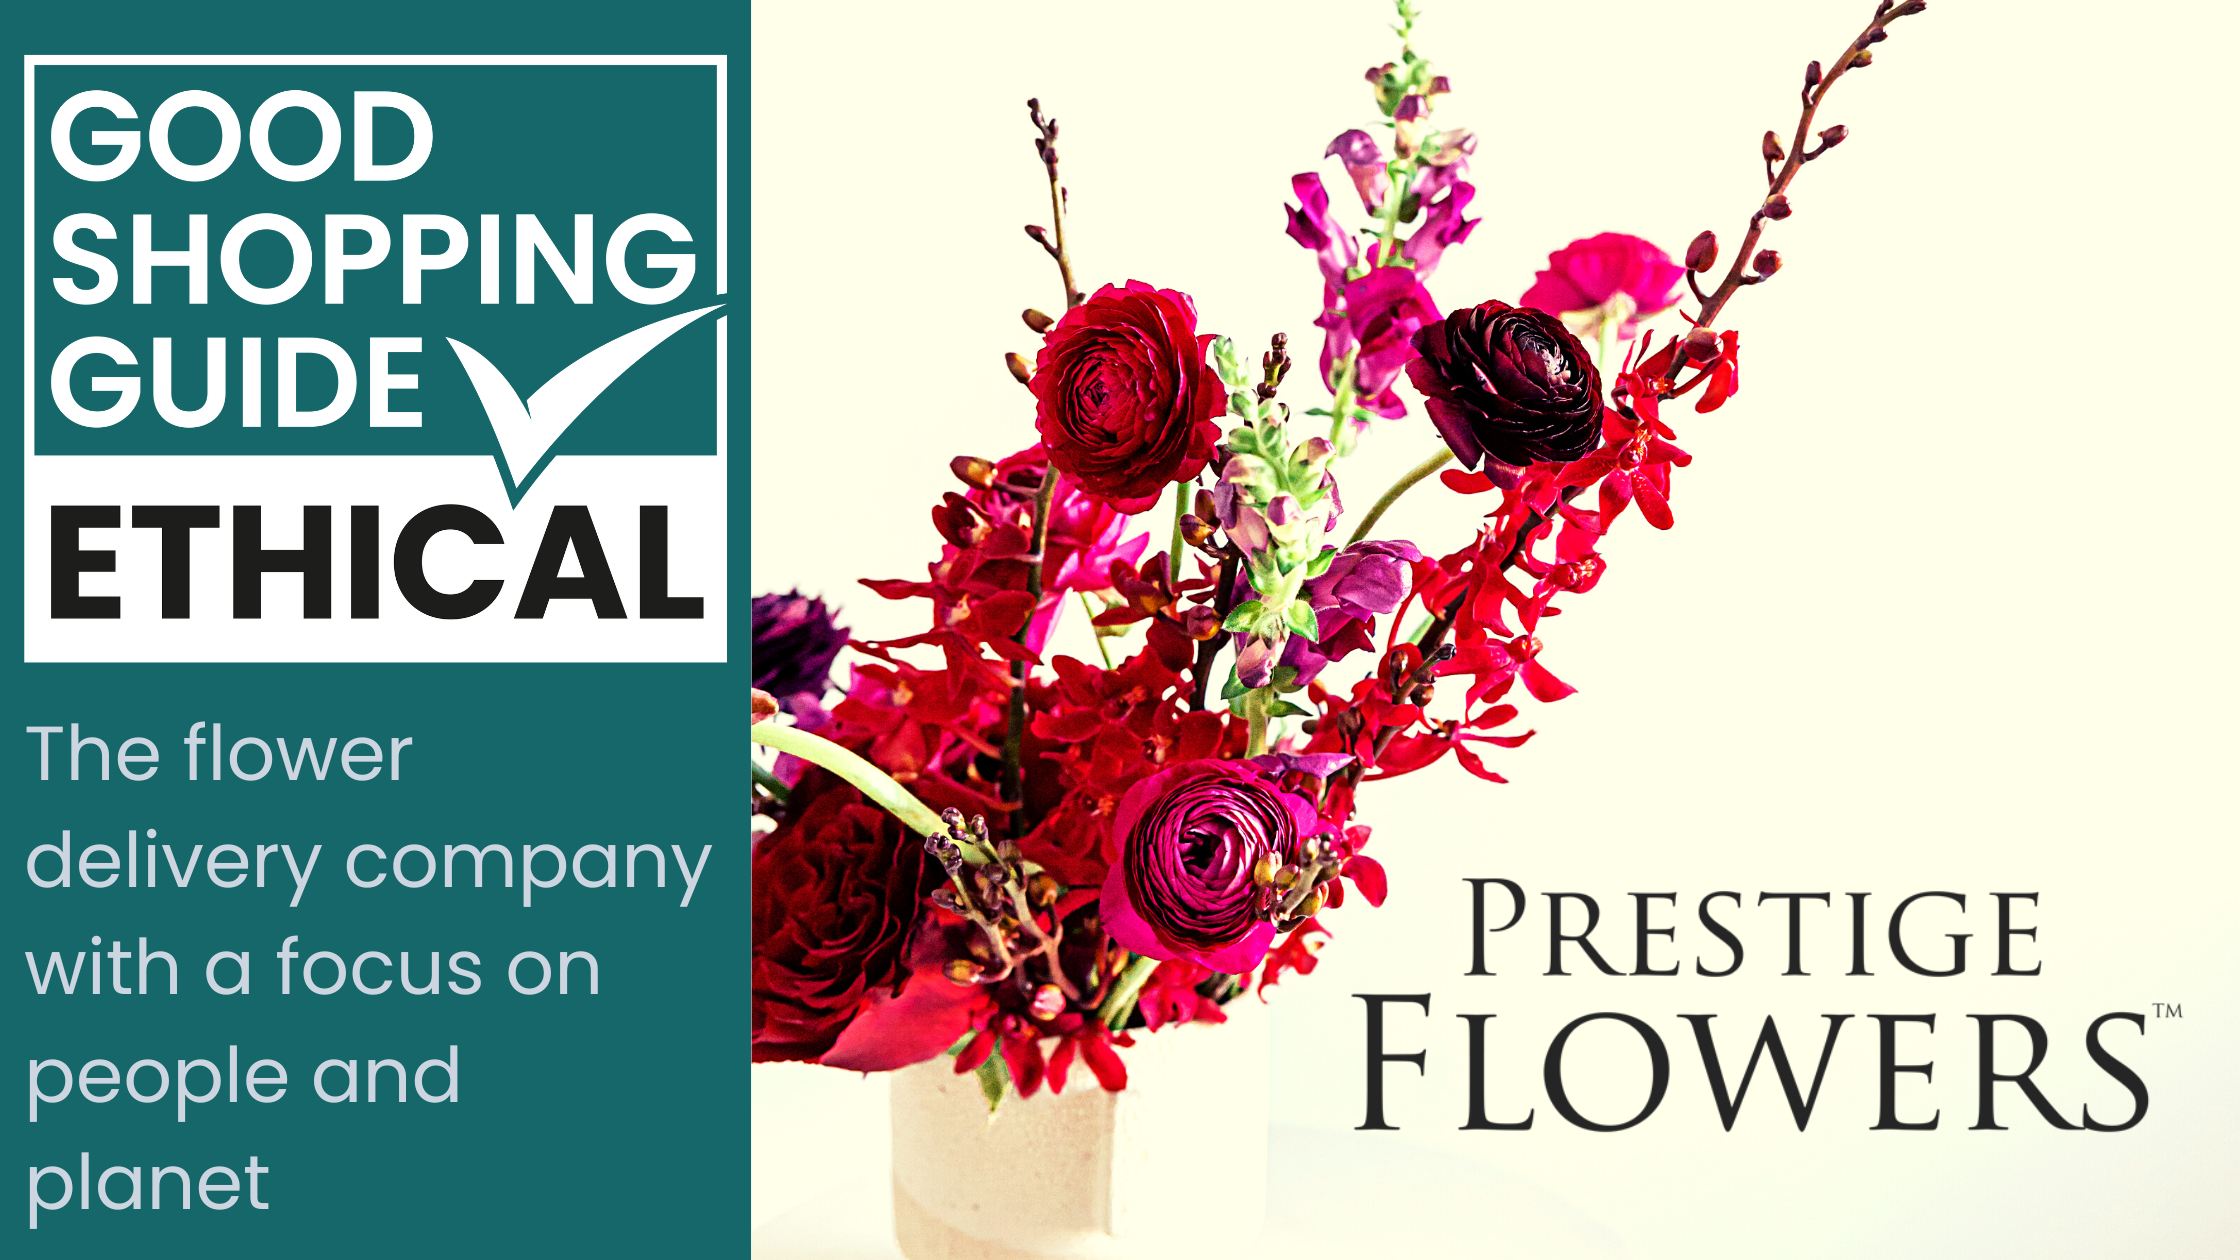 Is Prestige Flowers ethical